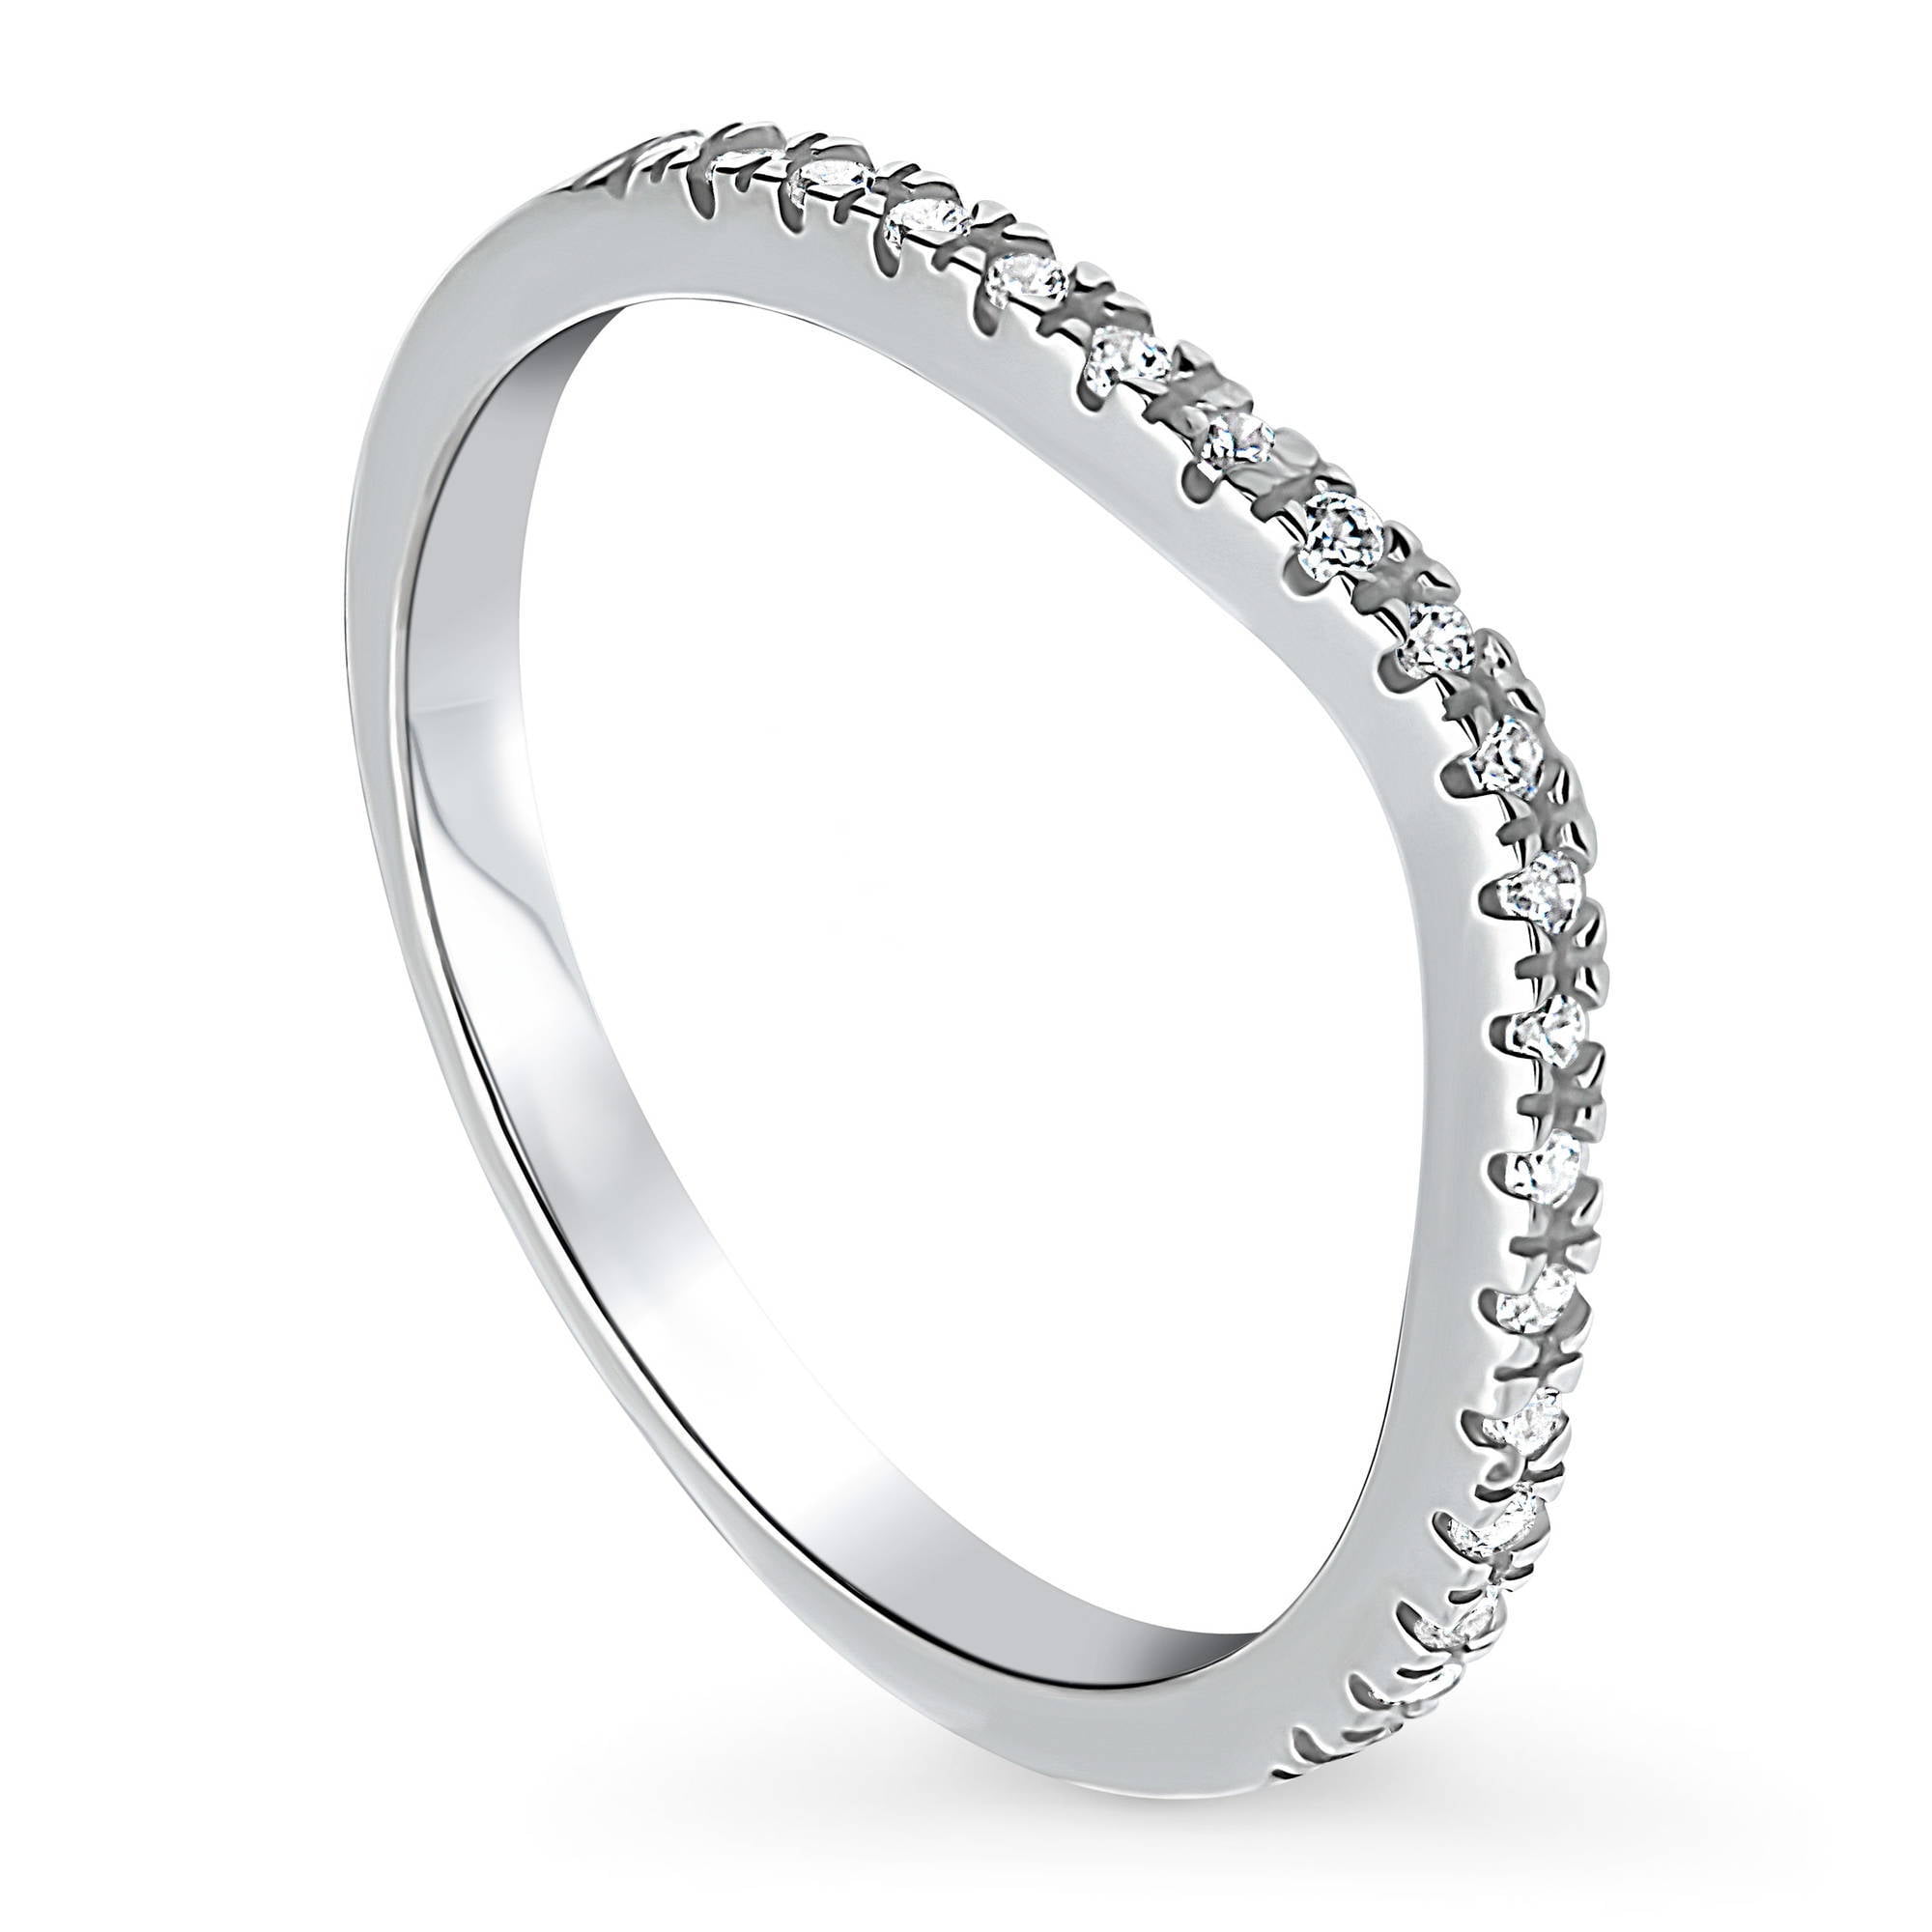 BERRICLE Rhodium Plated Sterling Silver Cubic Zirconia CZ Wishbone Crown Anniversary Wedding Curved Half Eternity Band Ring 